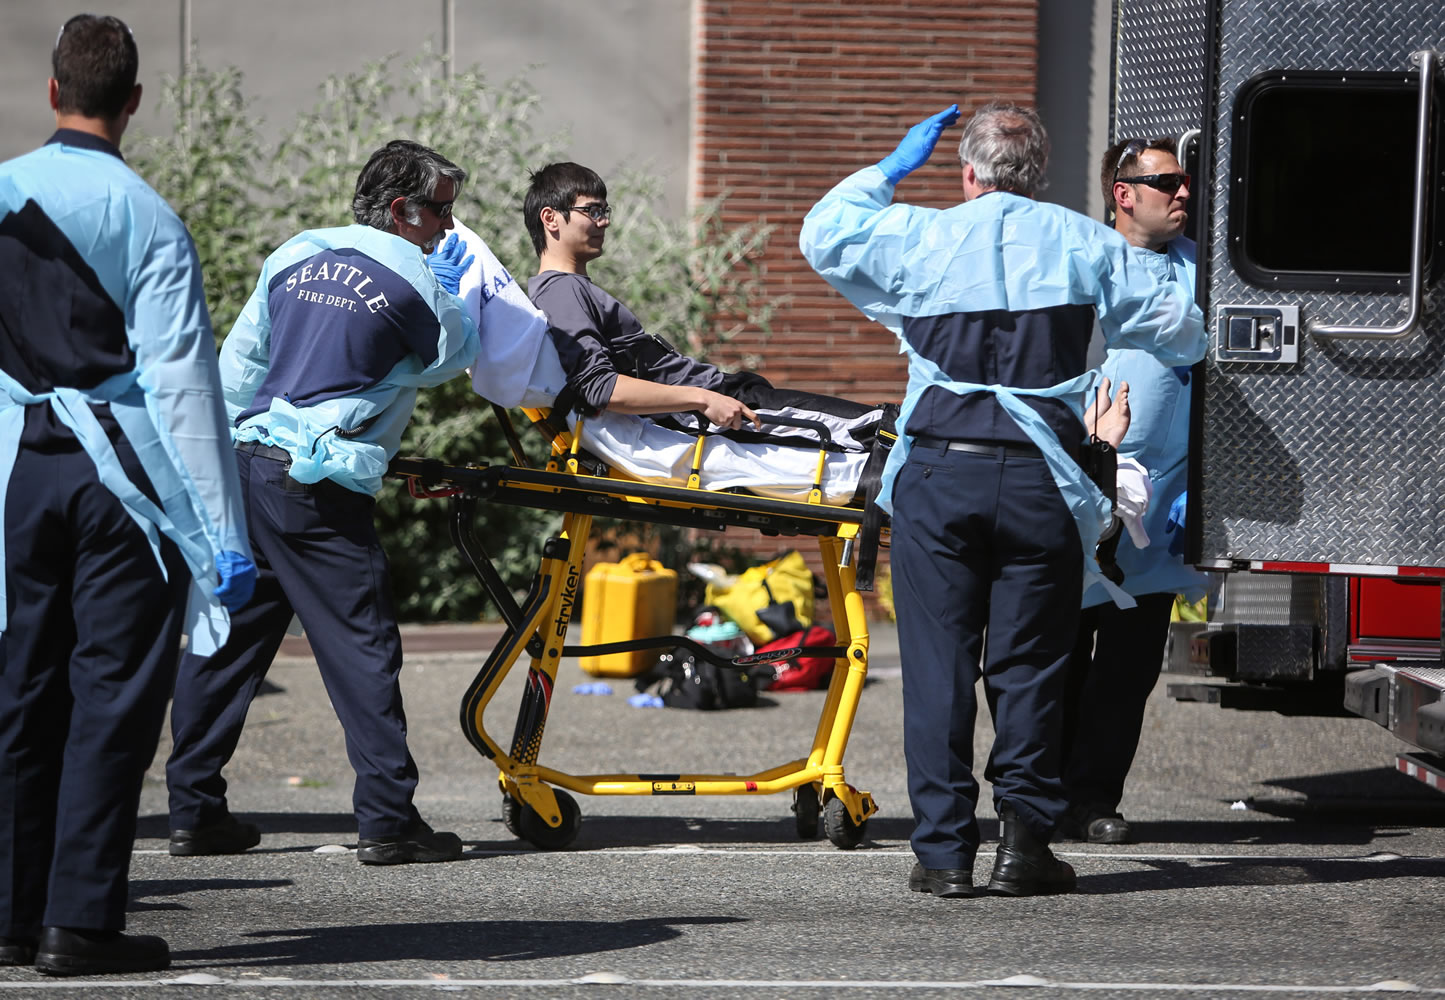 Jon Meis is taken from the scene by medics after a shooting at Seattle Pacific University on Thursday, June 5, 2014 in Seattle. A 19-year-old man was fatally shot and two other young people were wounded after a gunman entered the foyer at Otto Miller Hall on the Seattle Pacific University campus and started shooting Thursday afternoon. When he paused to reload, a student building monitor disarmed him. Meis is the student monitor who is credited with stopping the suspected gunman, Aaron R. Ybarra, 26,  by pepper spraying him and tackling him.